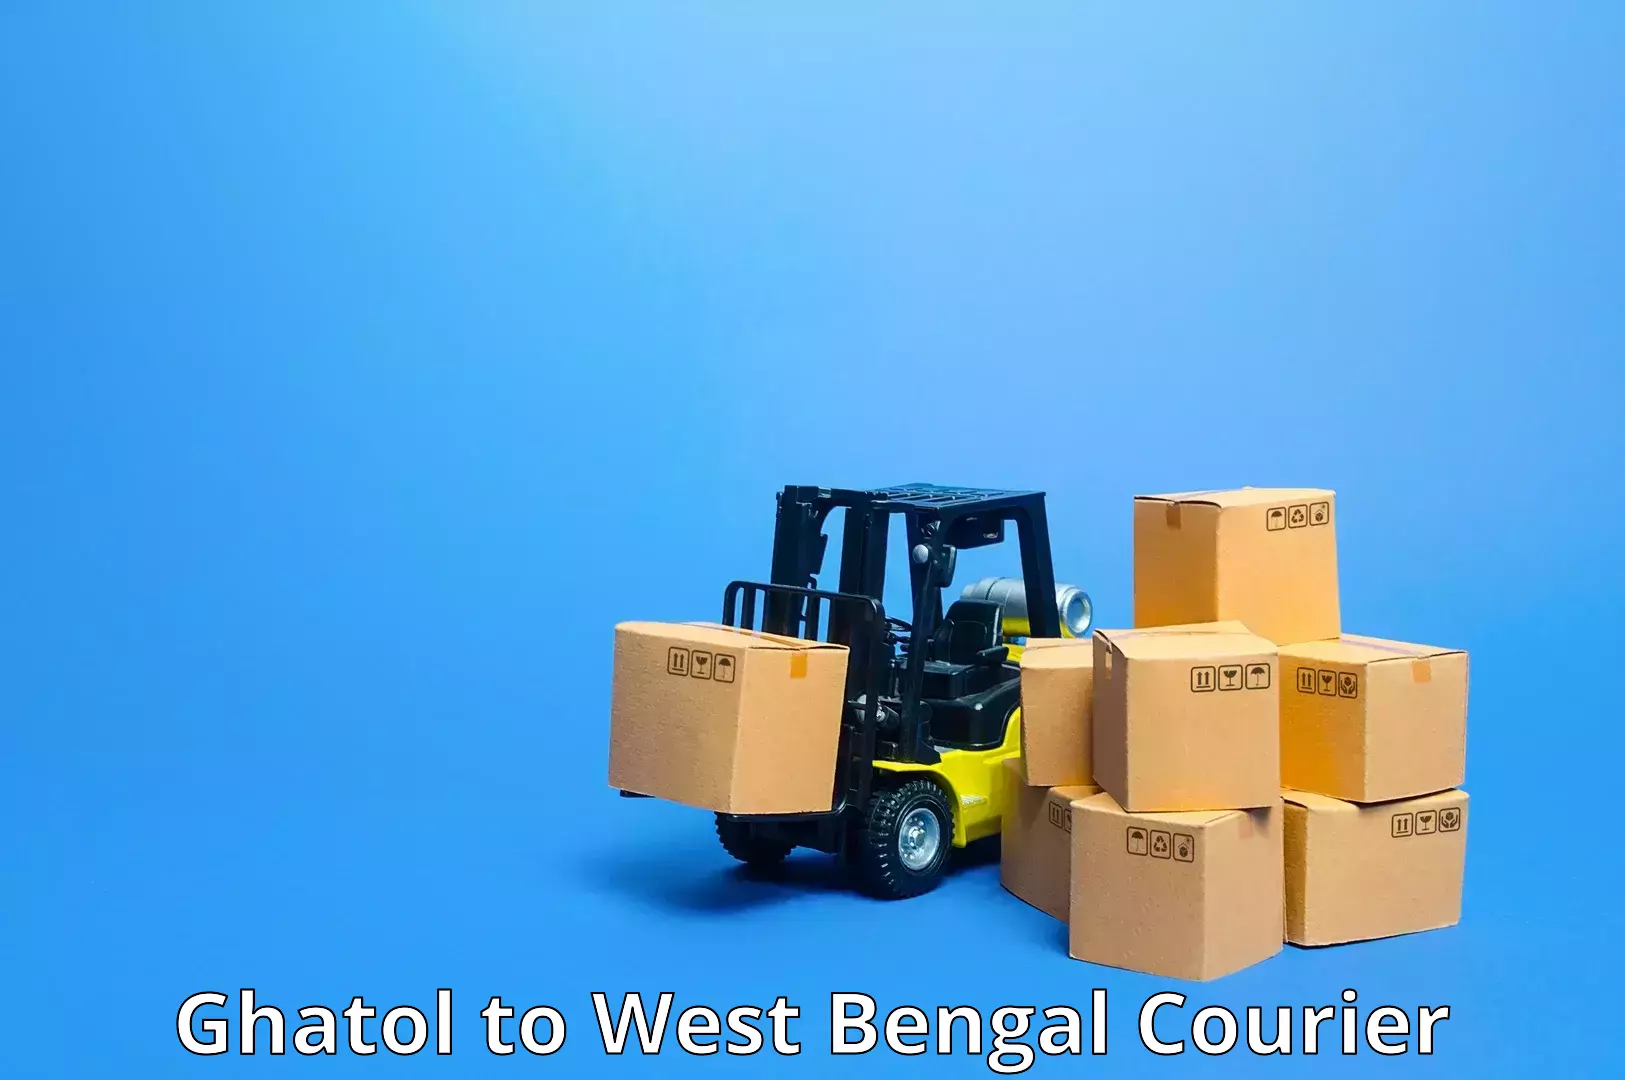 Innovative logistics solutions Ghatol to West Bengal